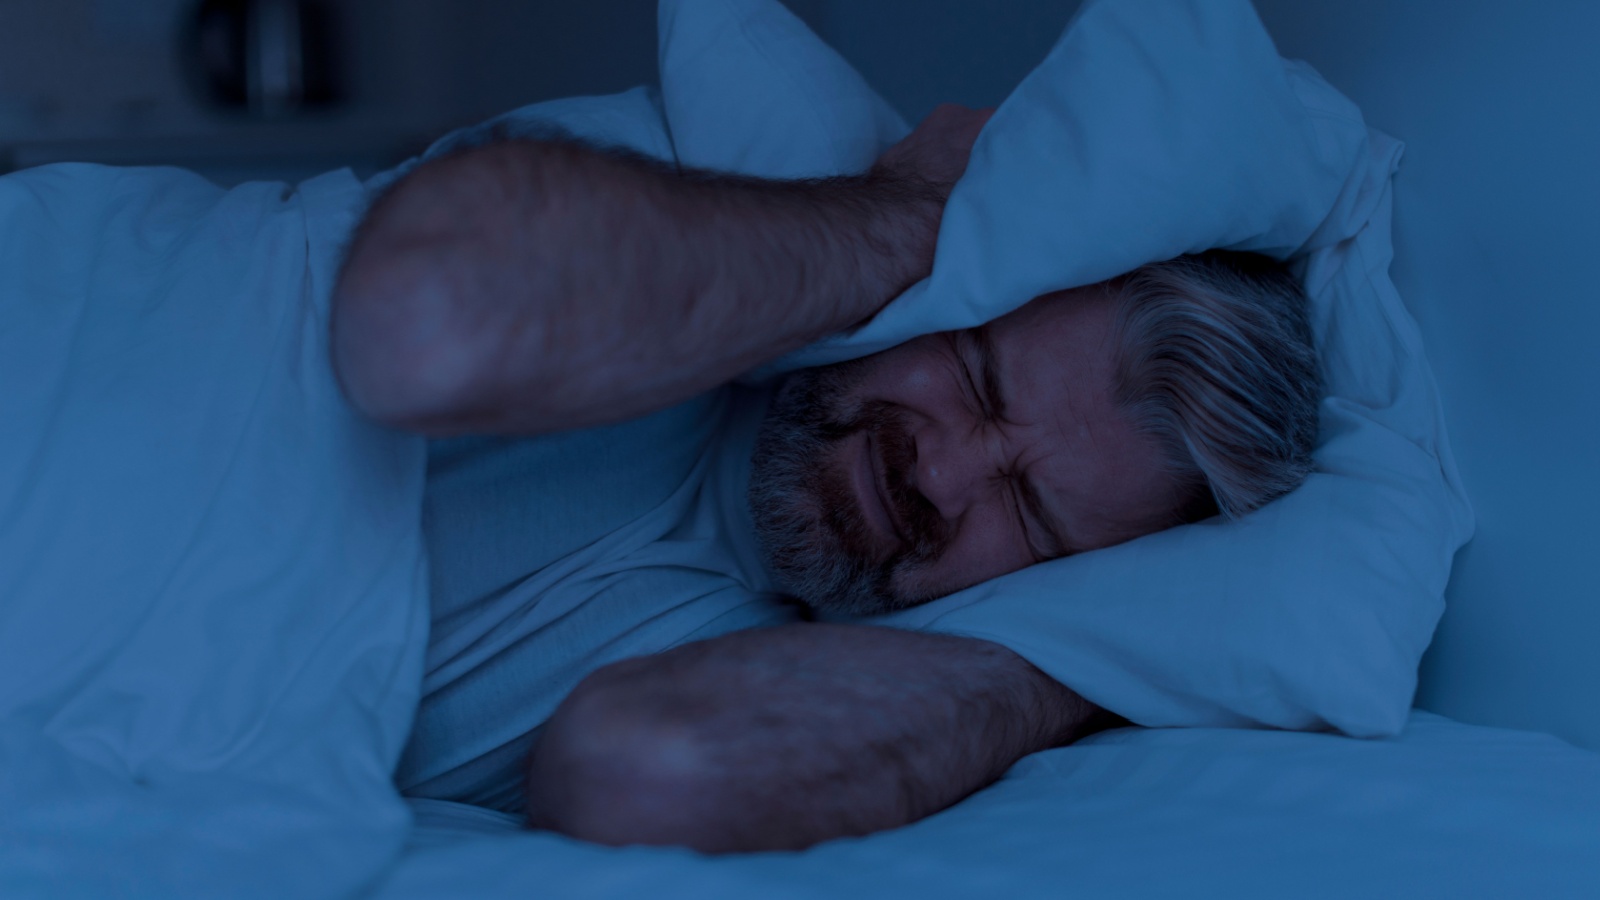 angry mature man lying in bed and covering head ears with pillow at night, cannot sleep, suffering from noisy neighbours or snoring spouse partner